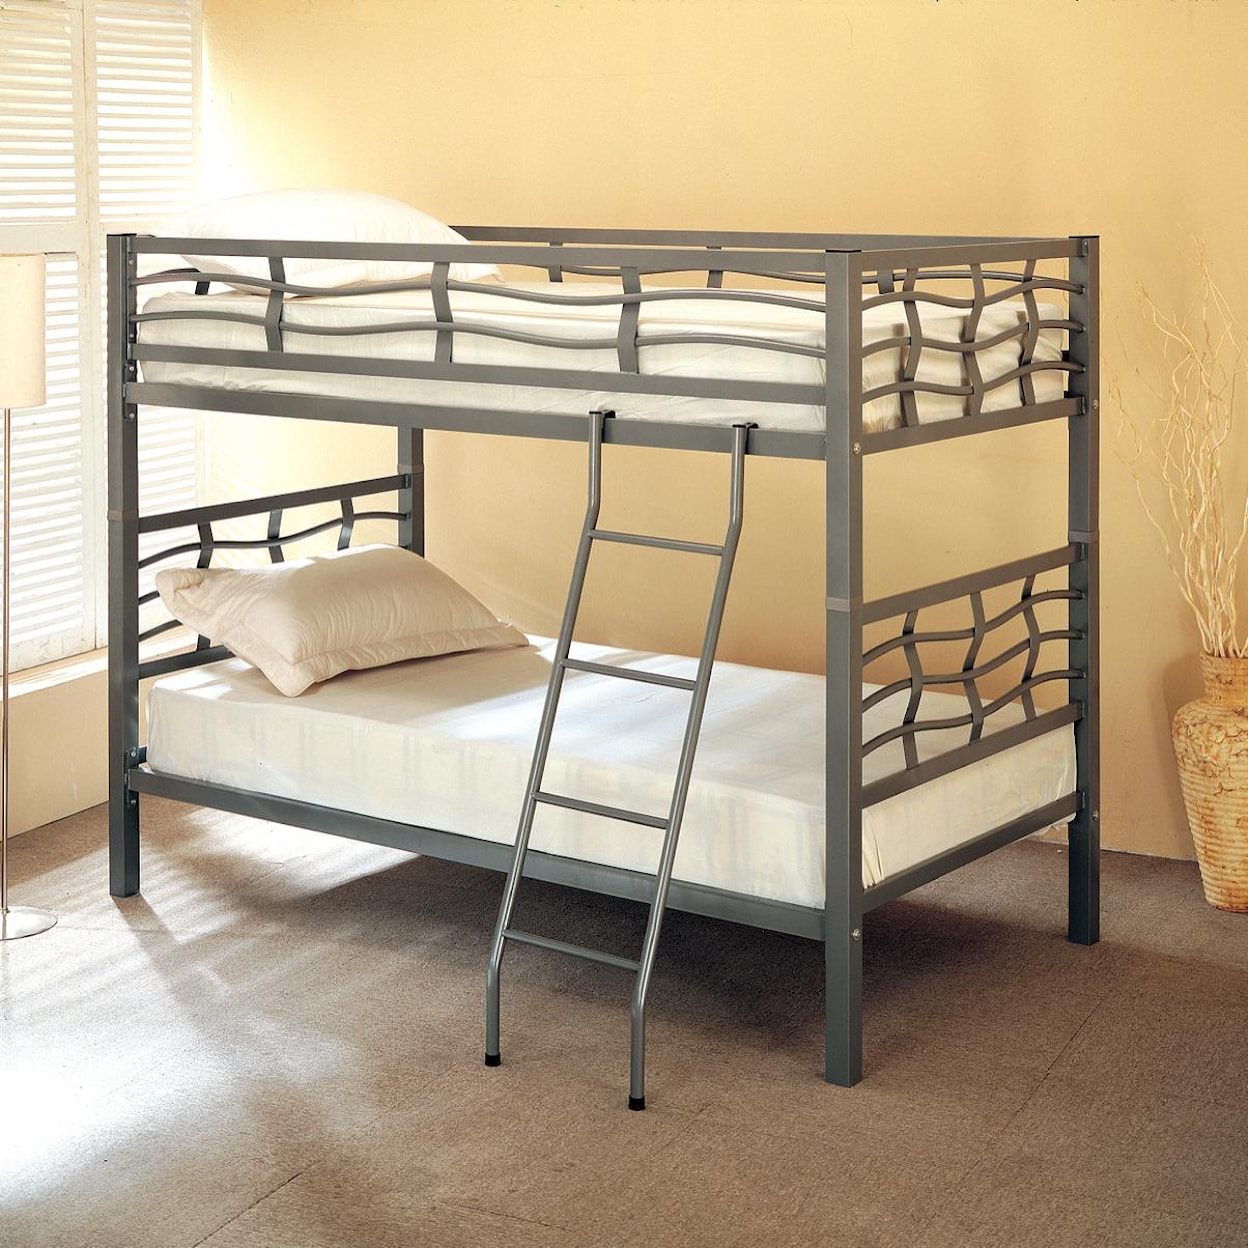 Coaster Bunks 7395 Twin Bunk Bed With Ladder Value City Furniture Bunk Beds